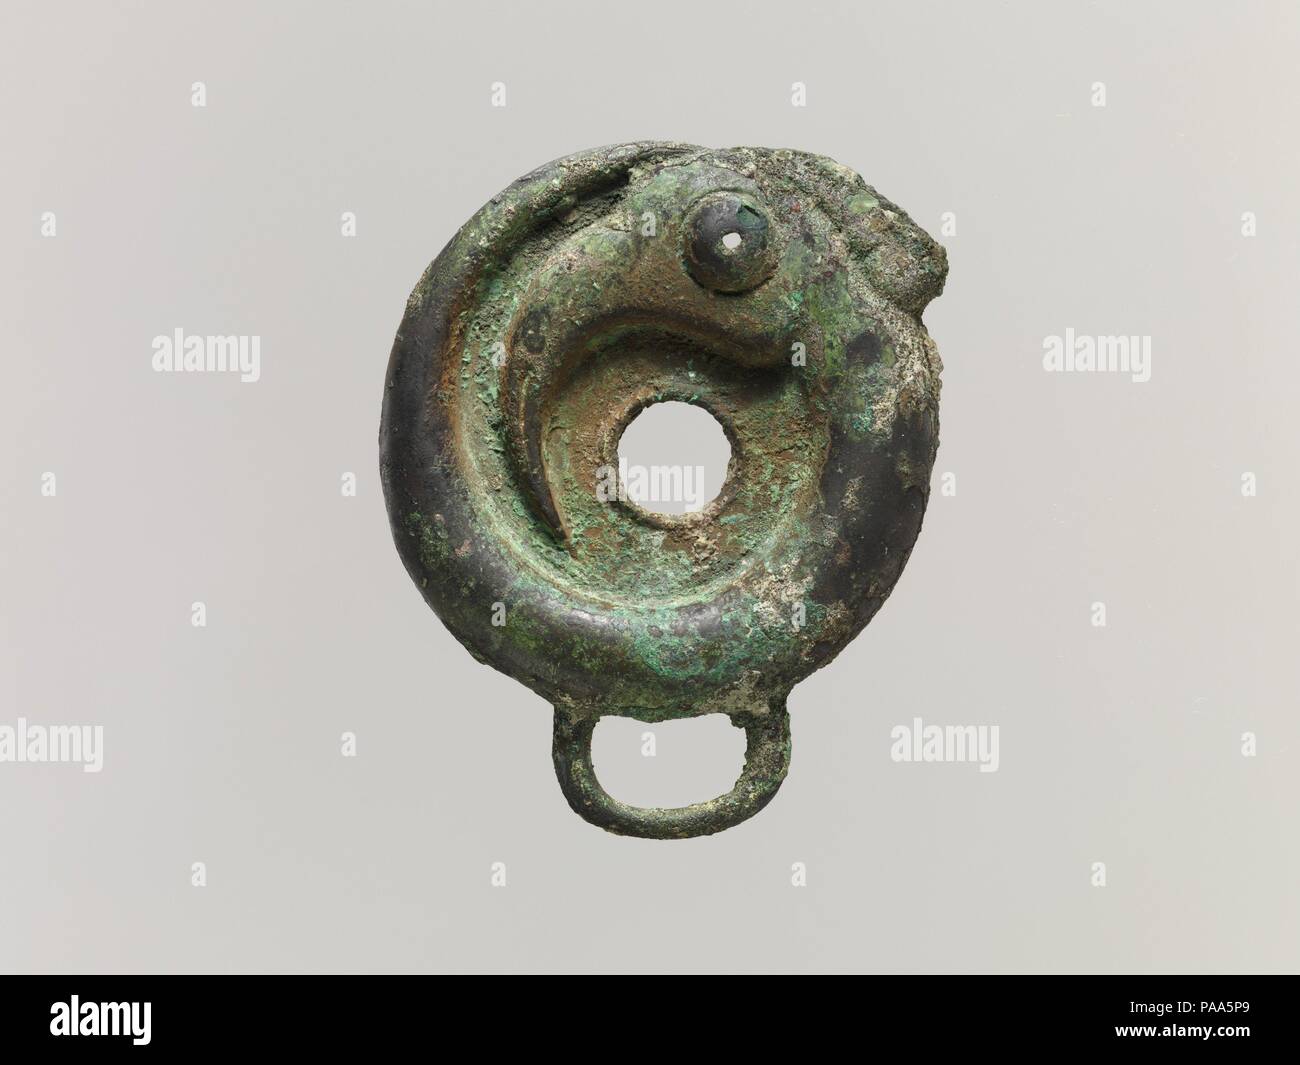 Bridle Cheekpiece. Culture: China. Dimensions: H. 3 3/4 in. (9.5 cm); W. 3 1/16 in. (7.8 cm). Date: 10th-9th century B.C.. Museum: Metropolitan Museum of Art, New York, USA. Stock Photo